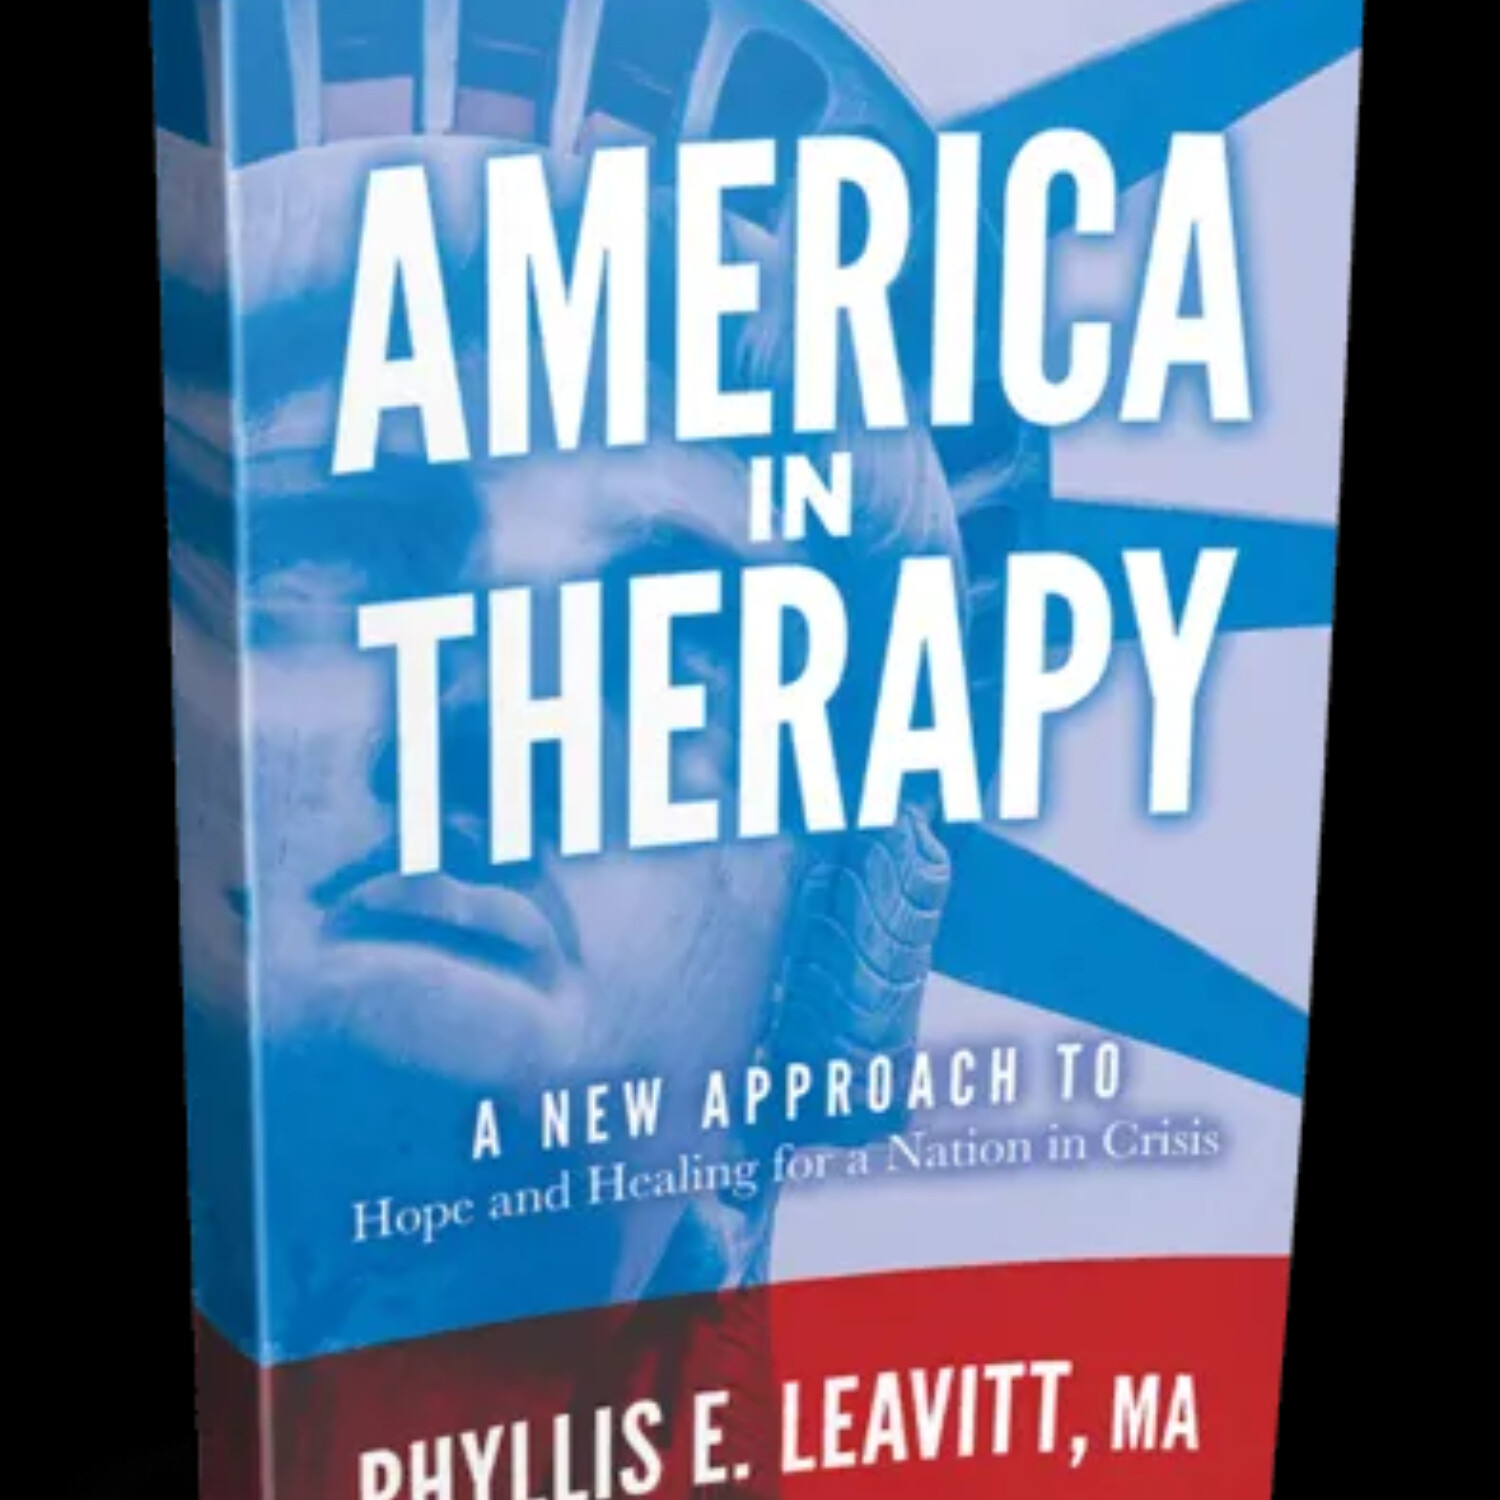 America in Therapy A New Approach to Hope and Healing with Author and Psychotherapist Phyllis Leavitt